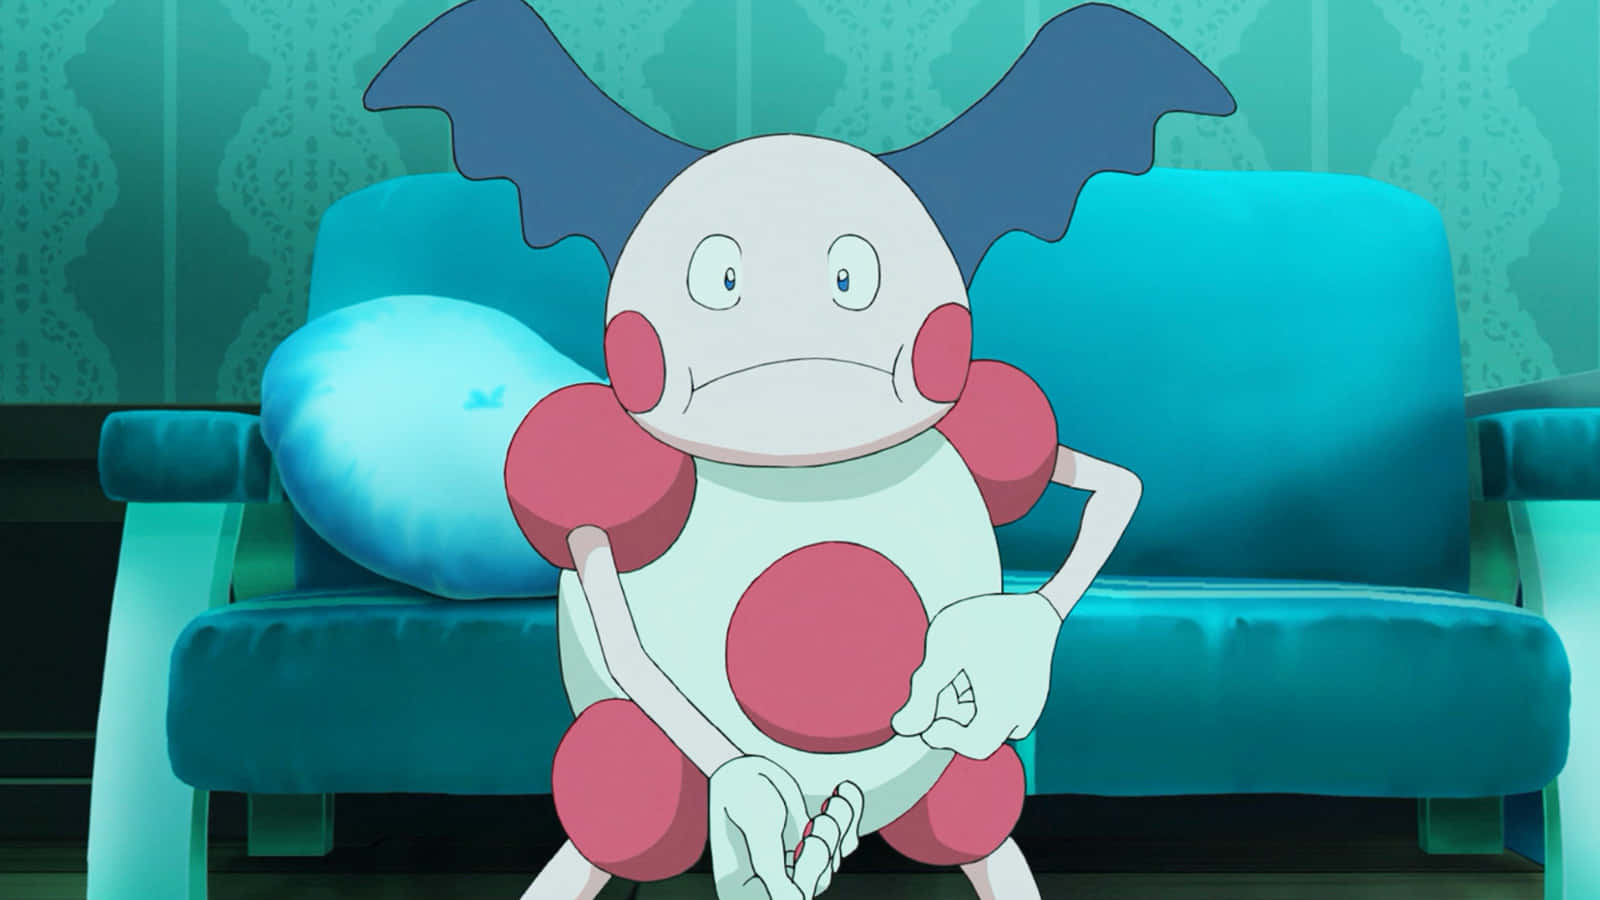 Catching Attention - Mr. Mime in the Anime Wallpaper